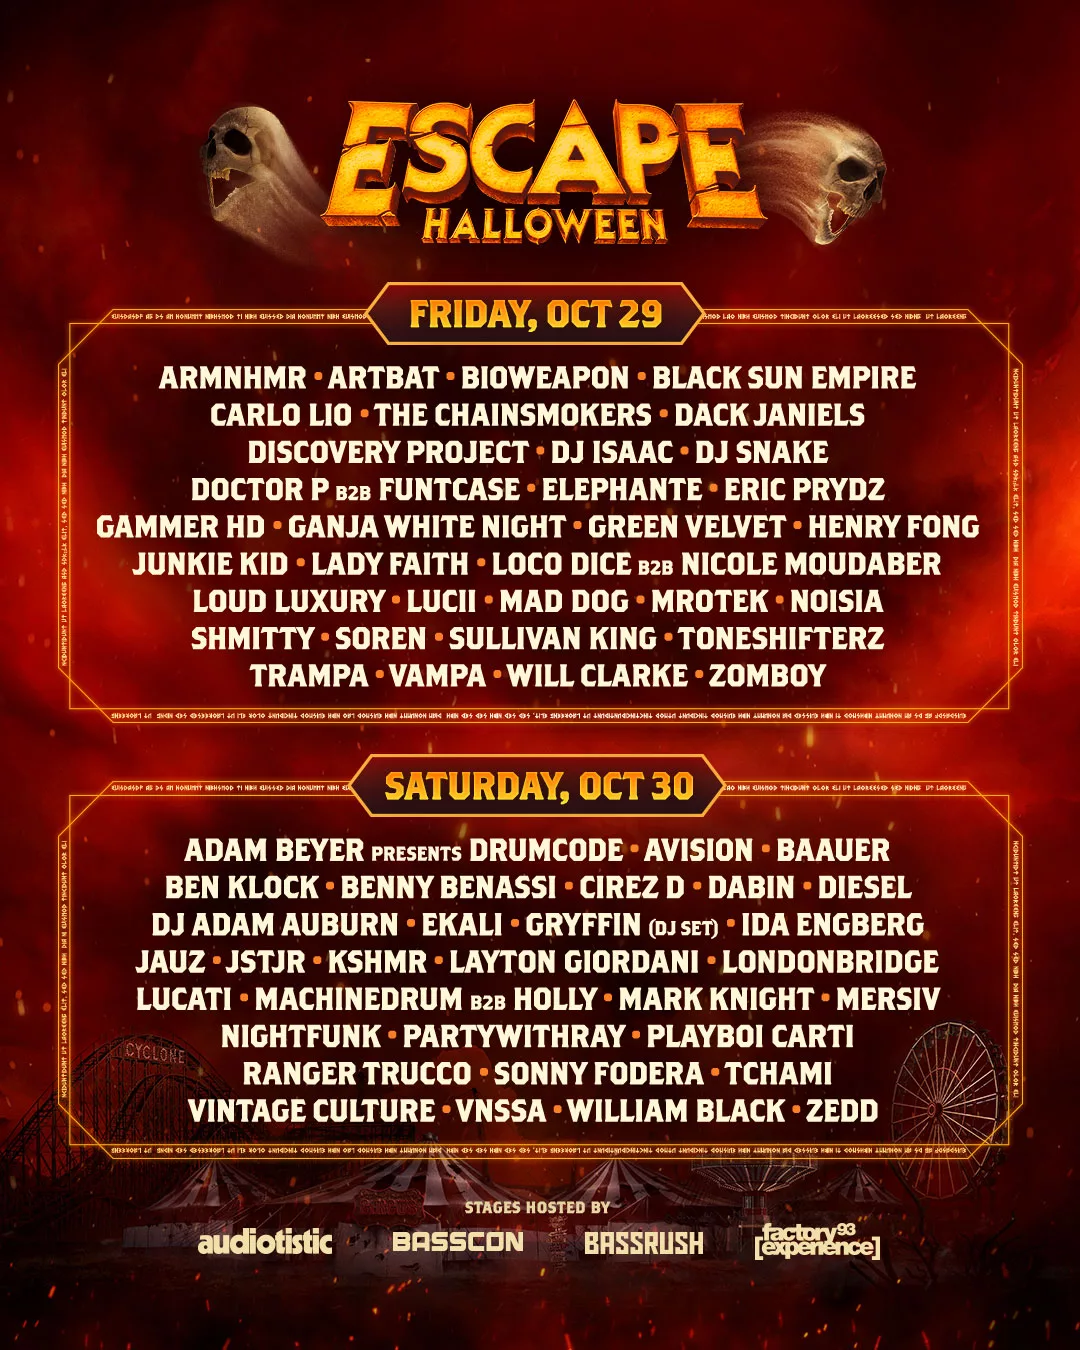 Escape Halloween 2021 Lineup poster image